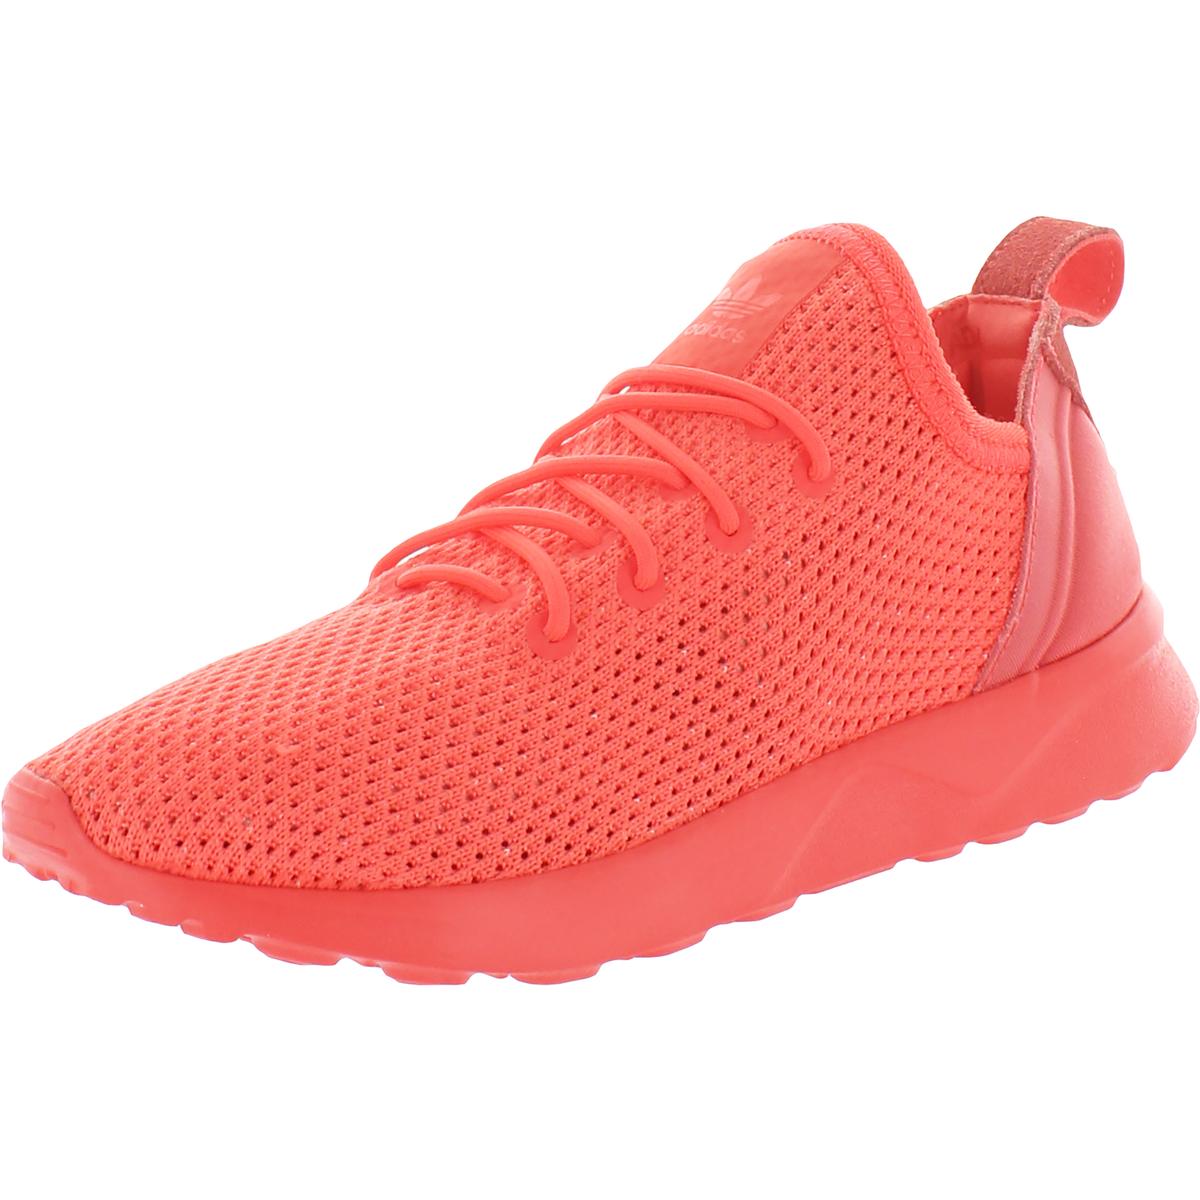 Zx Flux Adv Virtue Womens Fitness Workout Athletic Shoes